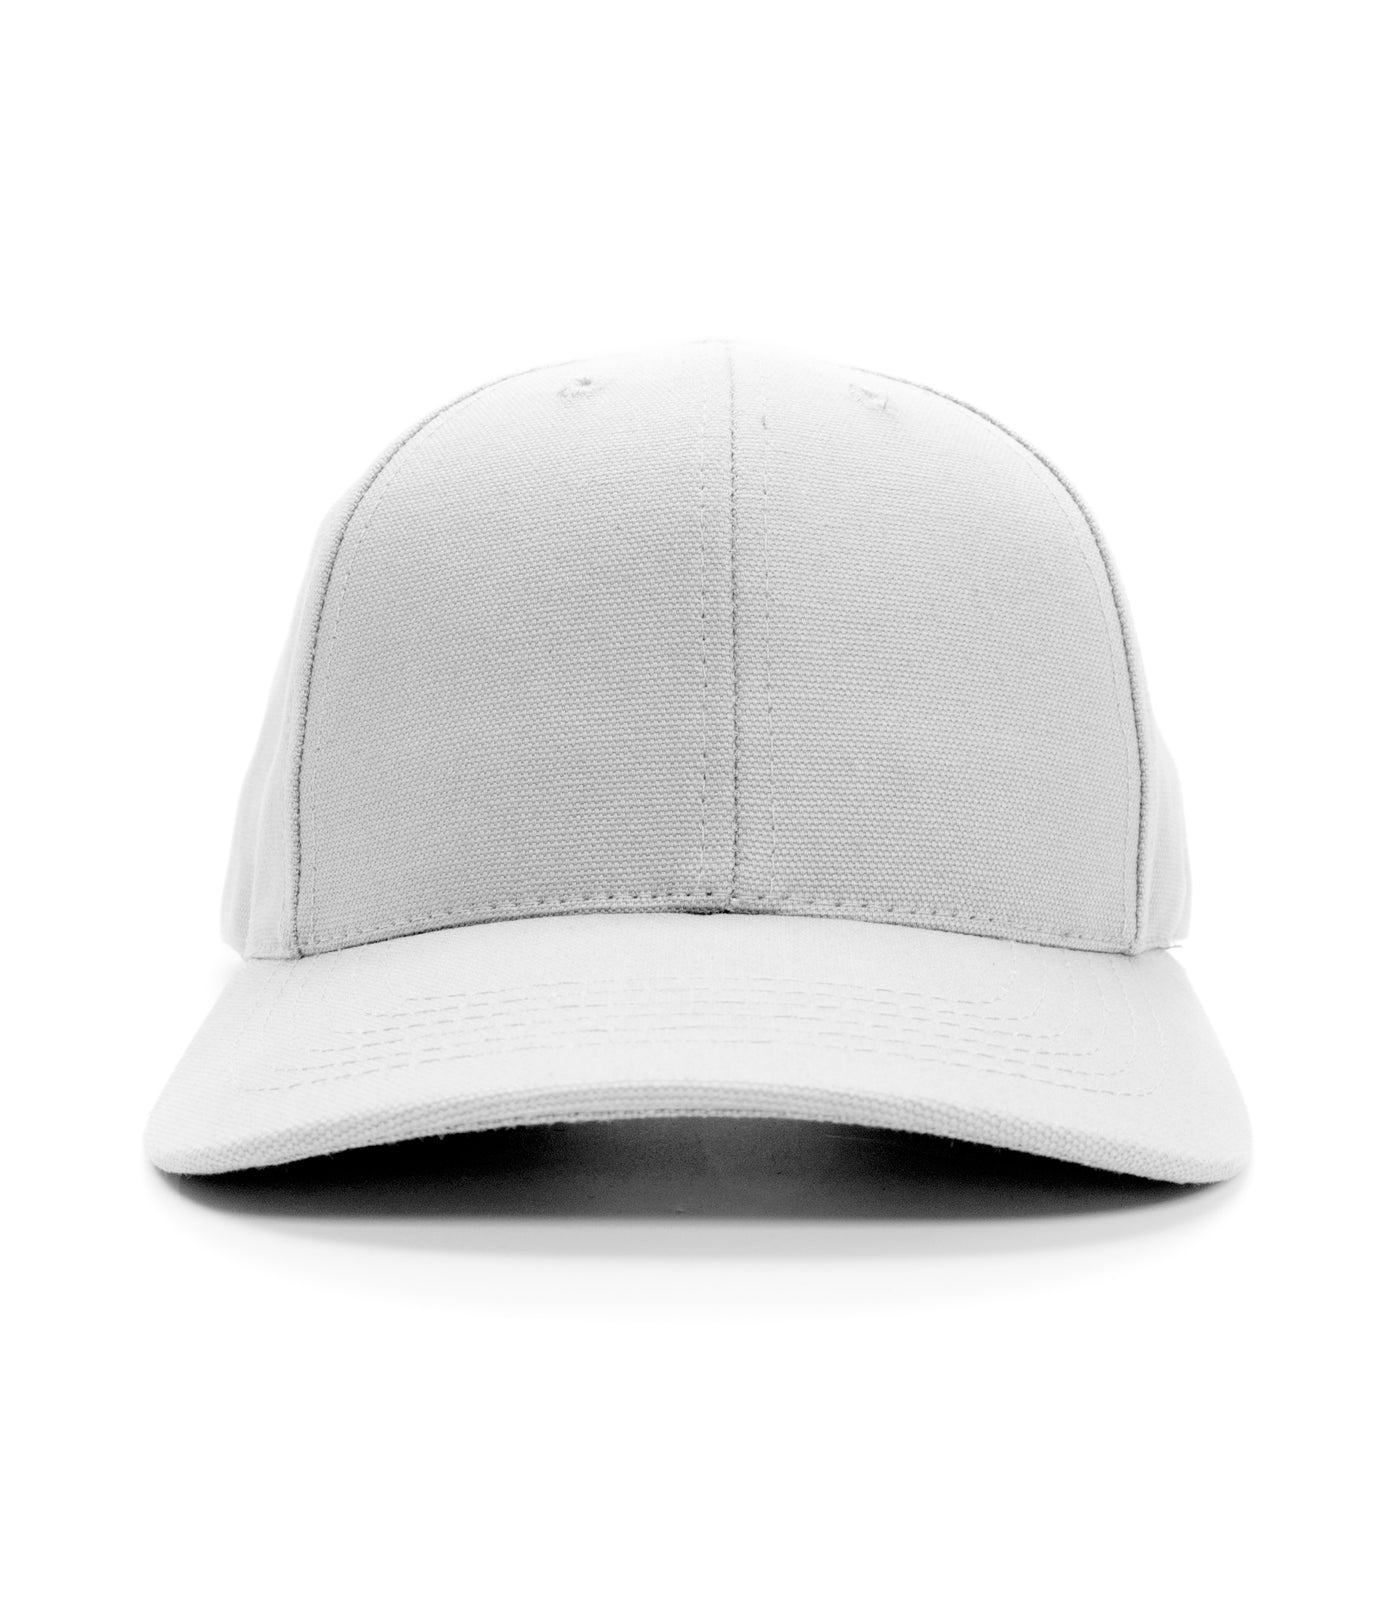 Cotton Adjustable Hat in White or Distressed Black